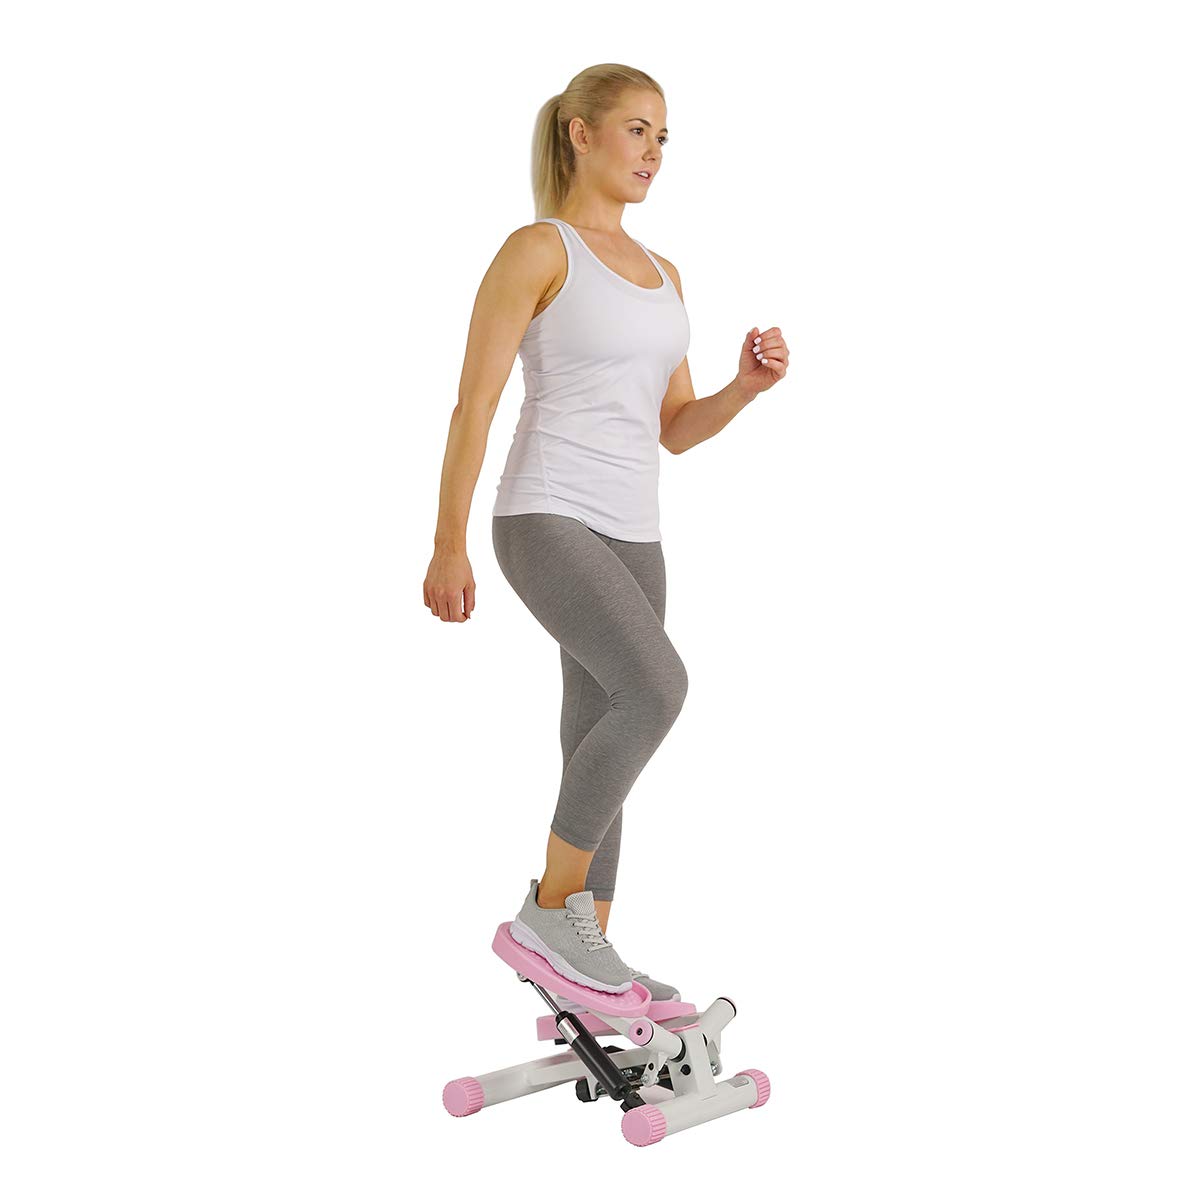 Sunny Health & Fitness Exercise Stepping Machine, Porta...